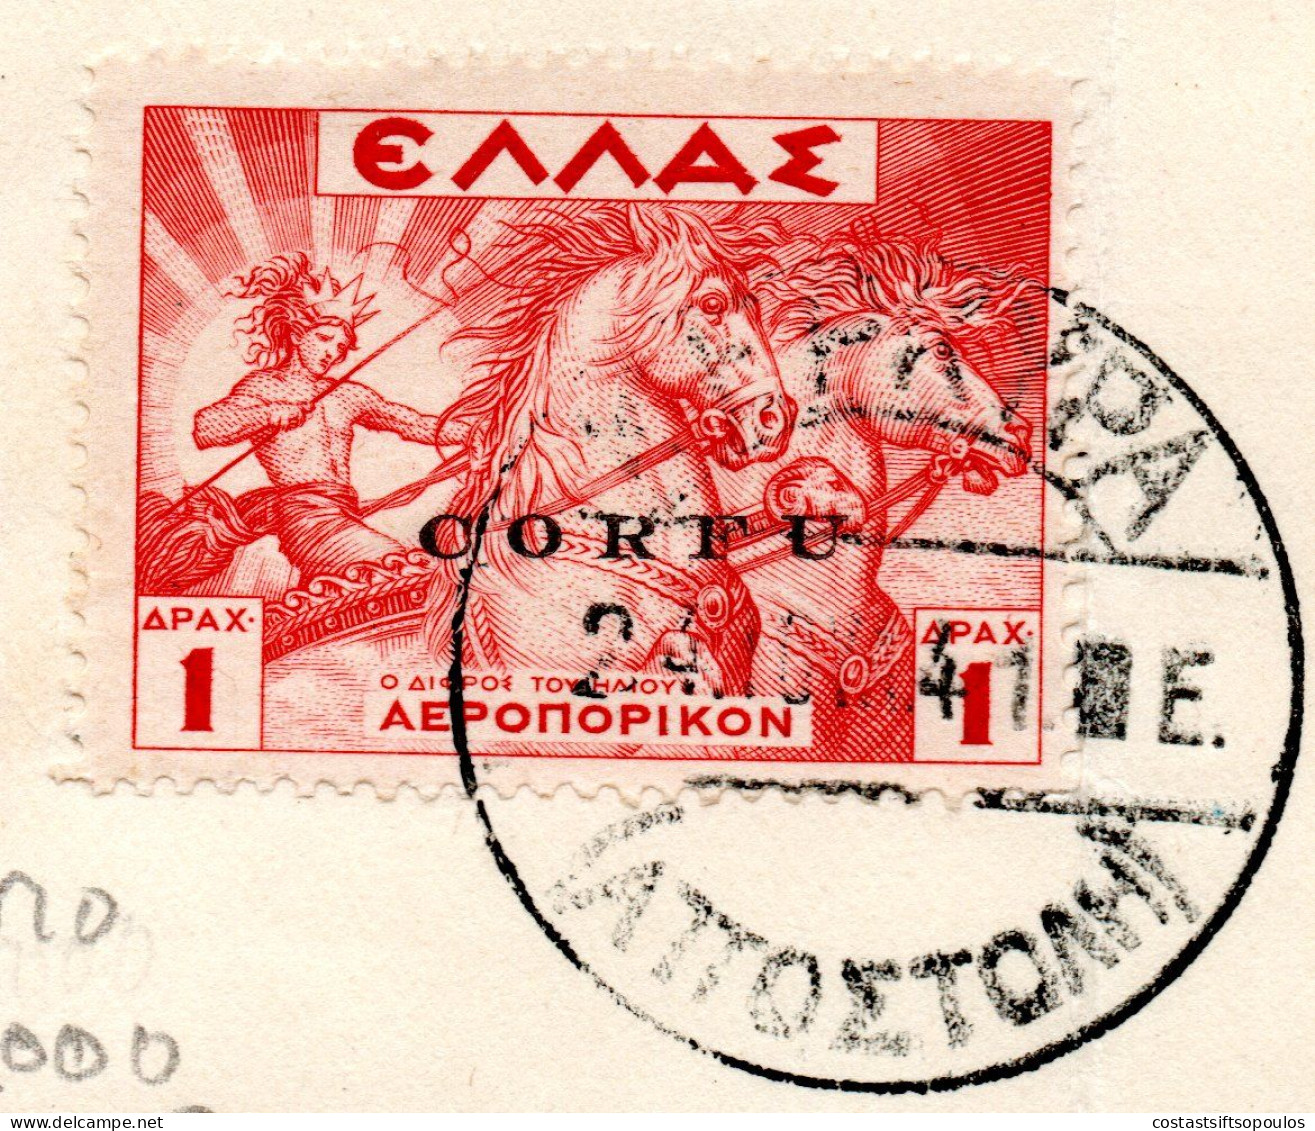 2643..GREECE,ITALY,IONIAN,CORFU,1941 AIRPOST HELLAS 20-31(-29 100 DR.}ON PAPER, CERTIFIED 15/8/41,13 SCANS - Ionian Islands